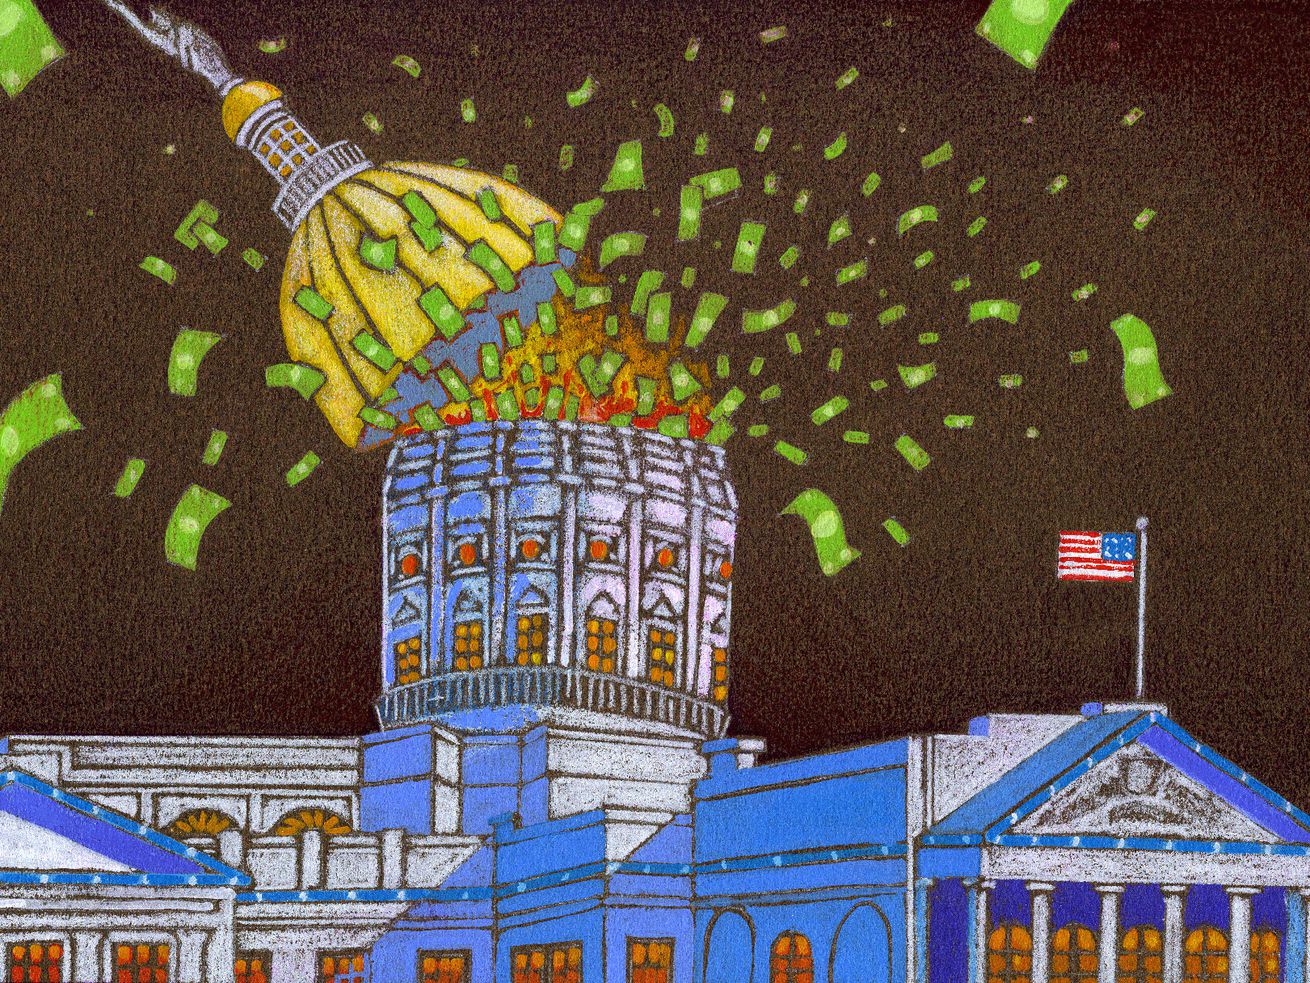 A cartoon of the uS Capitol building with its domed roof exploding off and dollar bills blowing out of it.